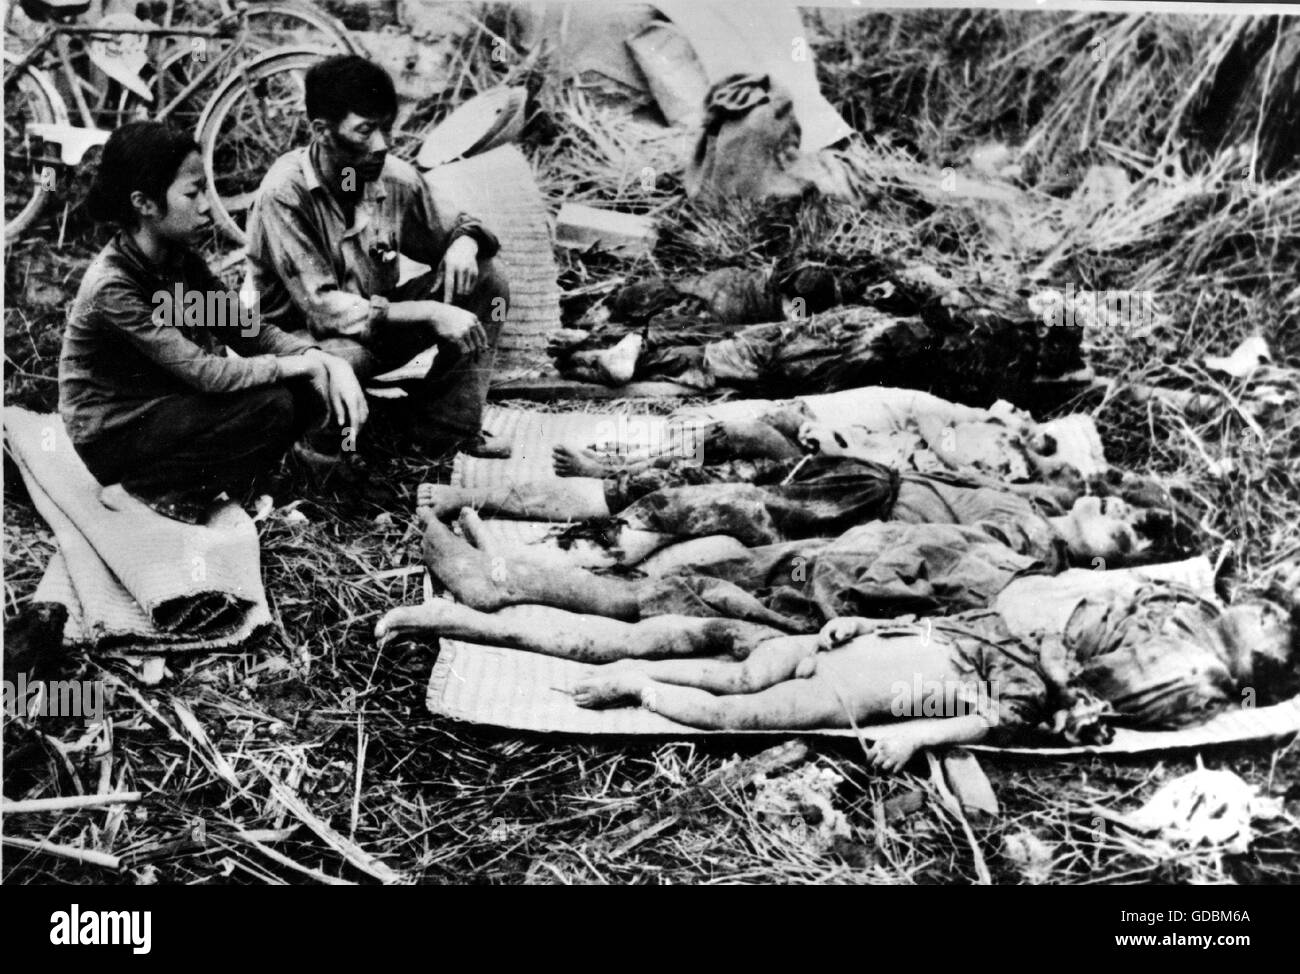 Vietnam War 1955 - 1975, aerial warfare, Operation Freedom Train, 6.4. - 8.5. 1972, victims of an American bombing attack on Hai Phong, North Vietnam, 16.4.1972, children, child, kids, kid, civilian, civilians, civilian casualties, war victim, war victims, dead, kill, killing, people, family, families, air attack, American Air Force, Haiphong, Viet Nam, Vietnam, war, wars, 20th century, 1970s, bomb attack, air raid, bombardment, bomb attacks, air raids, bombardments, historic, historical, Additional-Rights-Clearences-Not Available Stock Photo